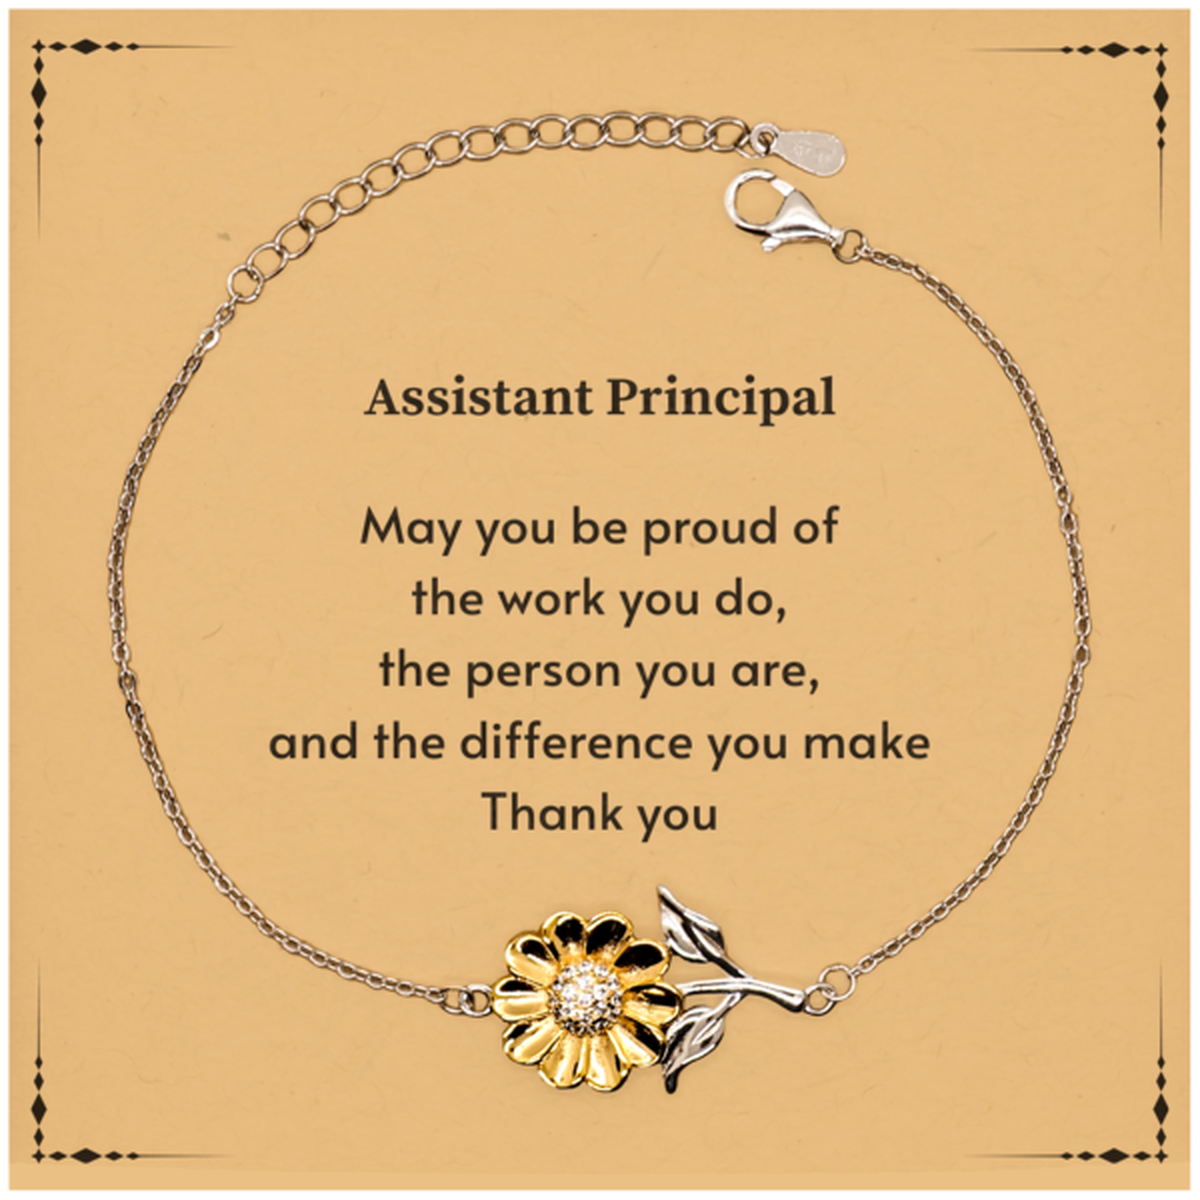 Heartwarming Sunflower Bracelet Retirement Coworkers Gifts for Assistant Principal, Assistant Principal May You be proud of the work you do, the person you are Gifts for Boss Men Women Friends